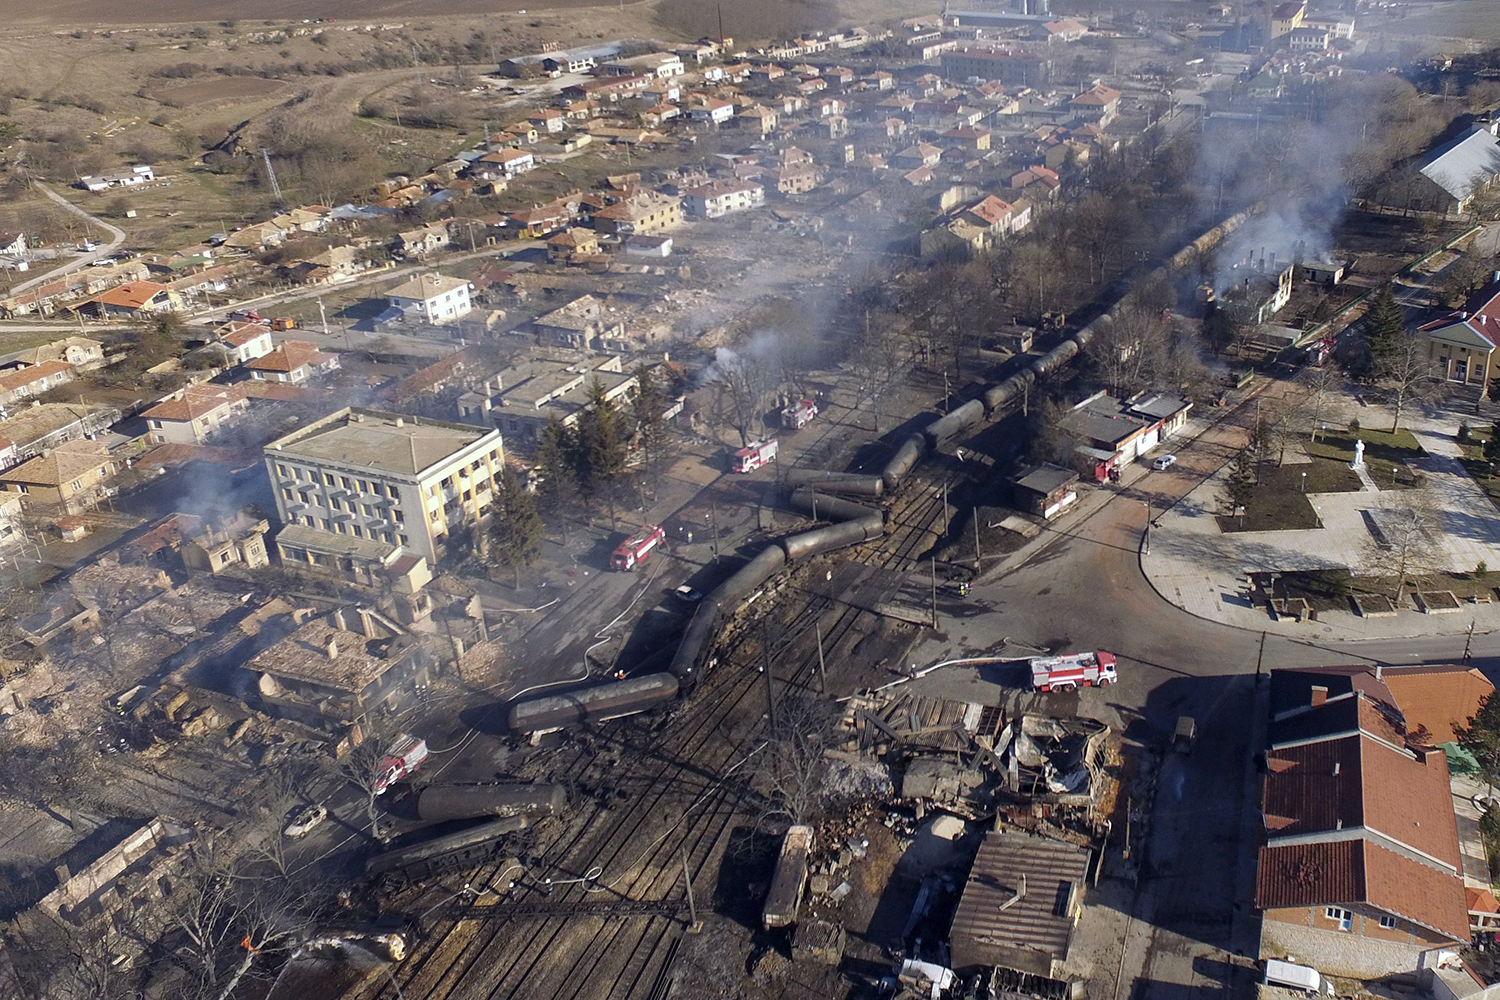 TOPSHOT - An aerial view shows the wreckage of a train transporting gas after it derailed and exploded in the northeastern Bulgarian village of Hitrino on December 10, 2016. At least five people died and 27 were injured in the blast, emergency services said. Around 20 homes were smashed and many of the residents of the village of some 800 people were evacuated. / AFP PHOTO / Boris KOLEV / TT / kod 444